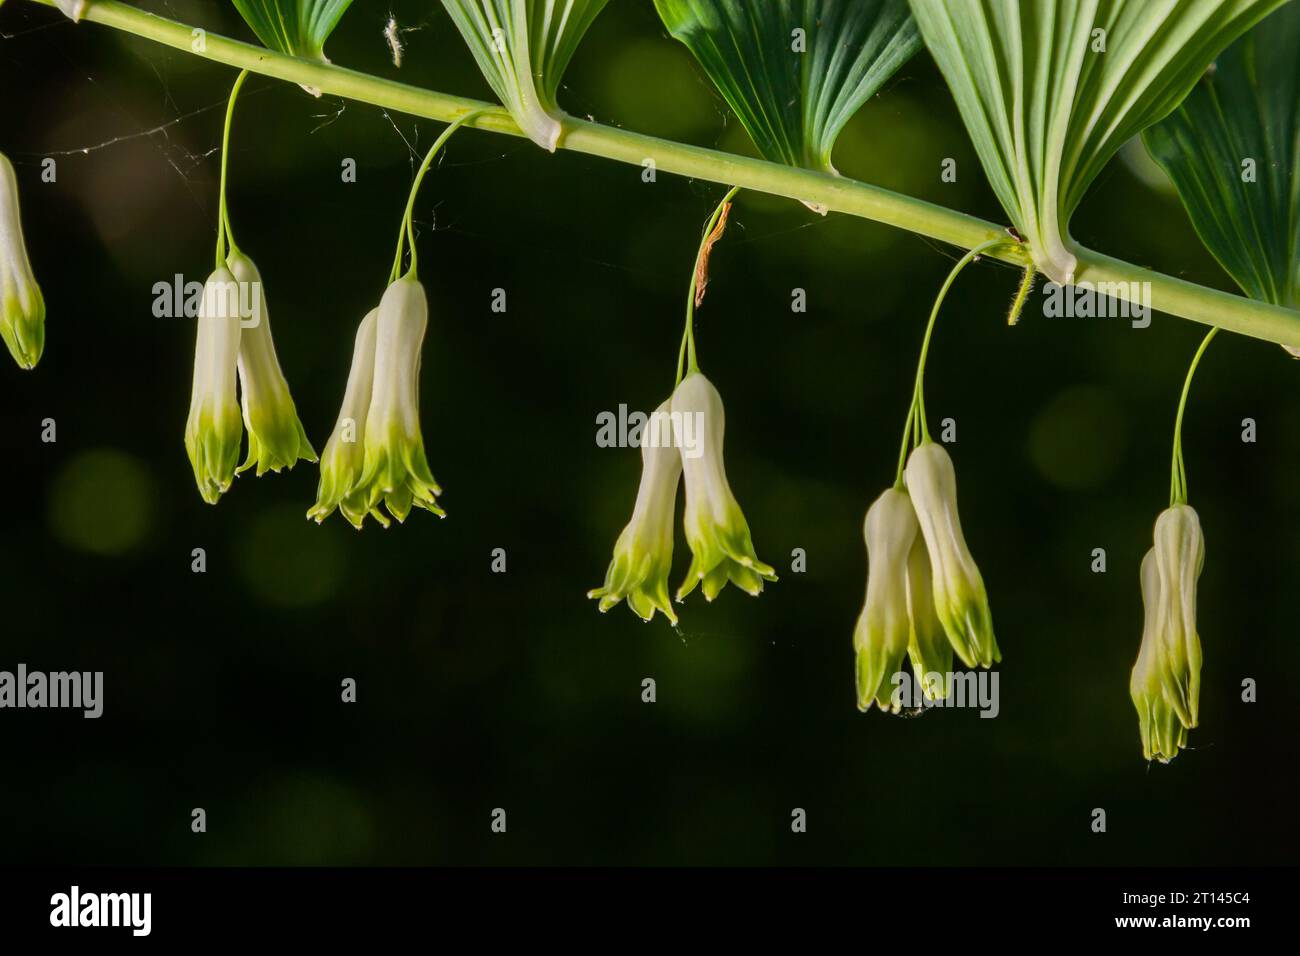 Polygonatum multiflorum, the Solomon's seal, David's harp, ladder-to-heaven or Eurasian Solomon's seal, is a species of flowering plant in the family Stock Photo